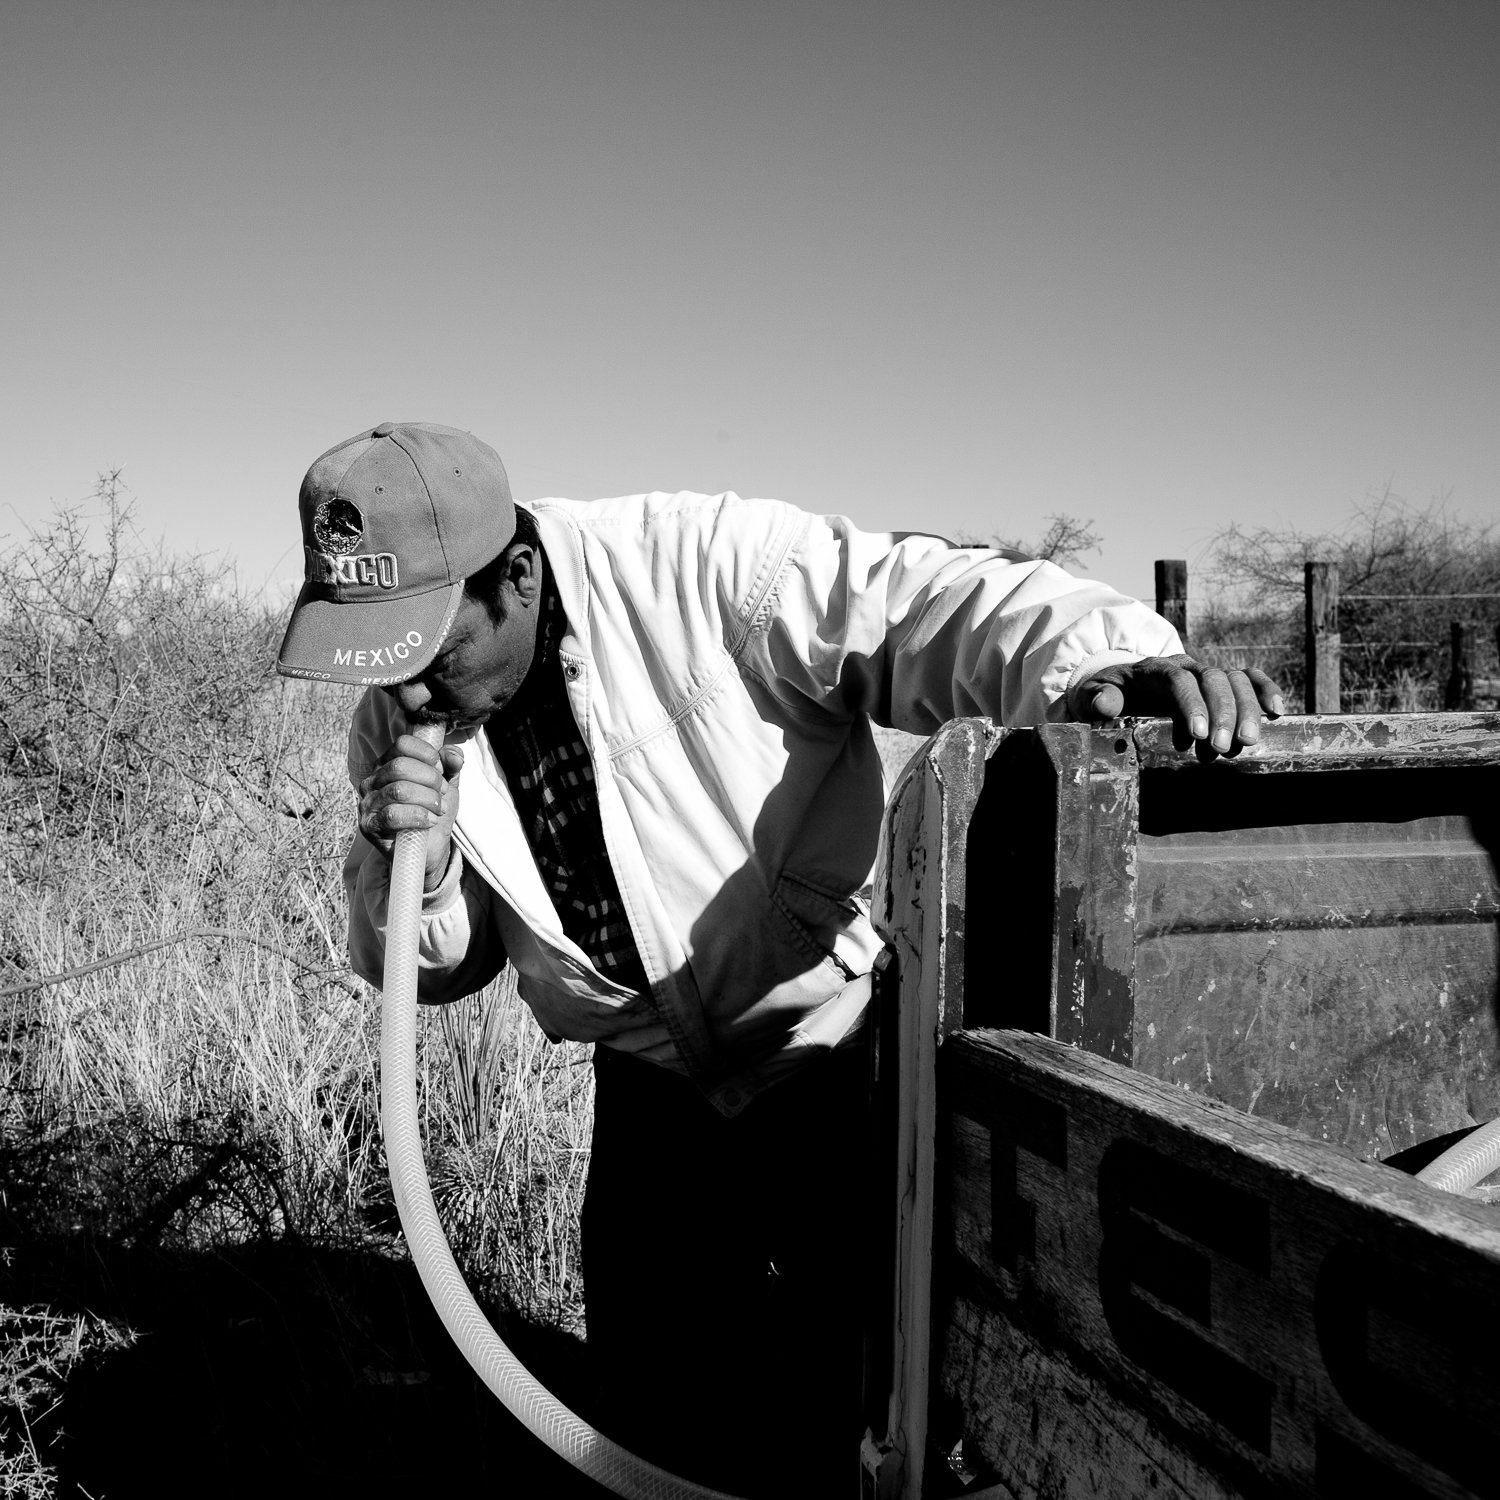  Fernando Lerma, a volunteer with the Migrant Resource Center, siphons water through a hose while filling water tanks for thirsty migrants in the desert near Naco, Sonora, Mexico. 